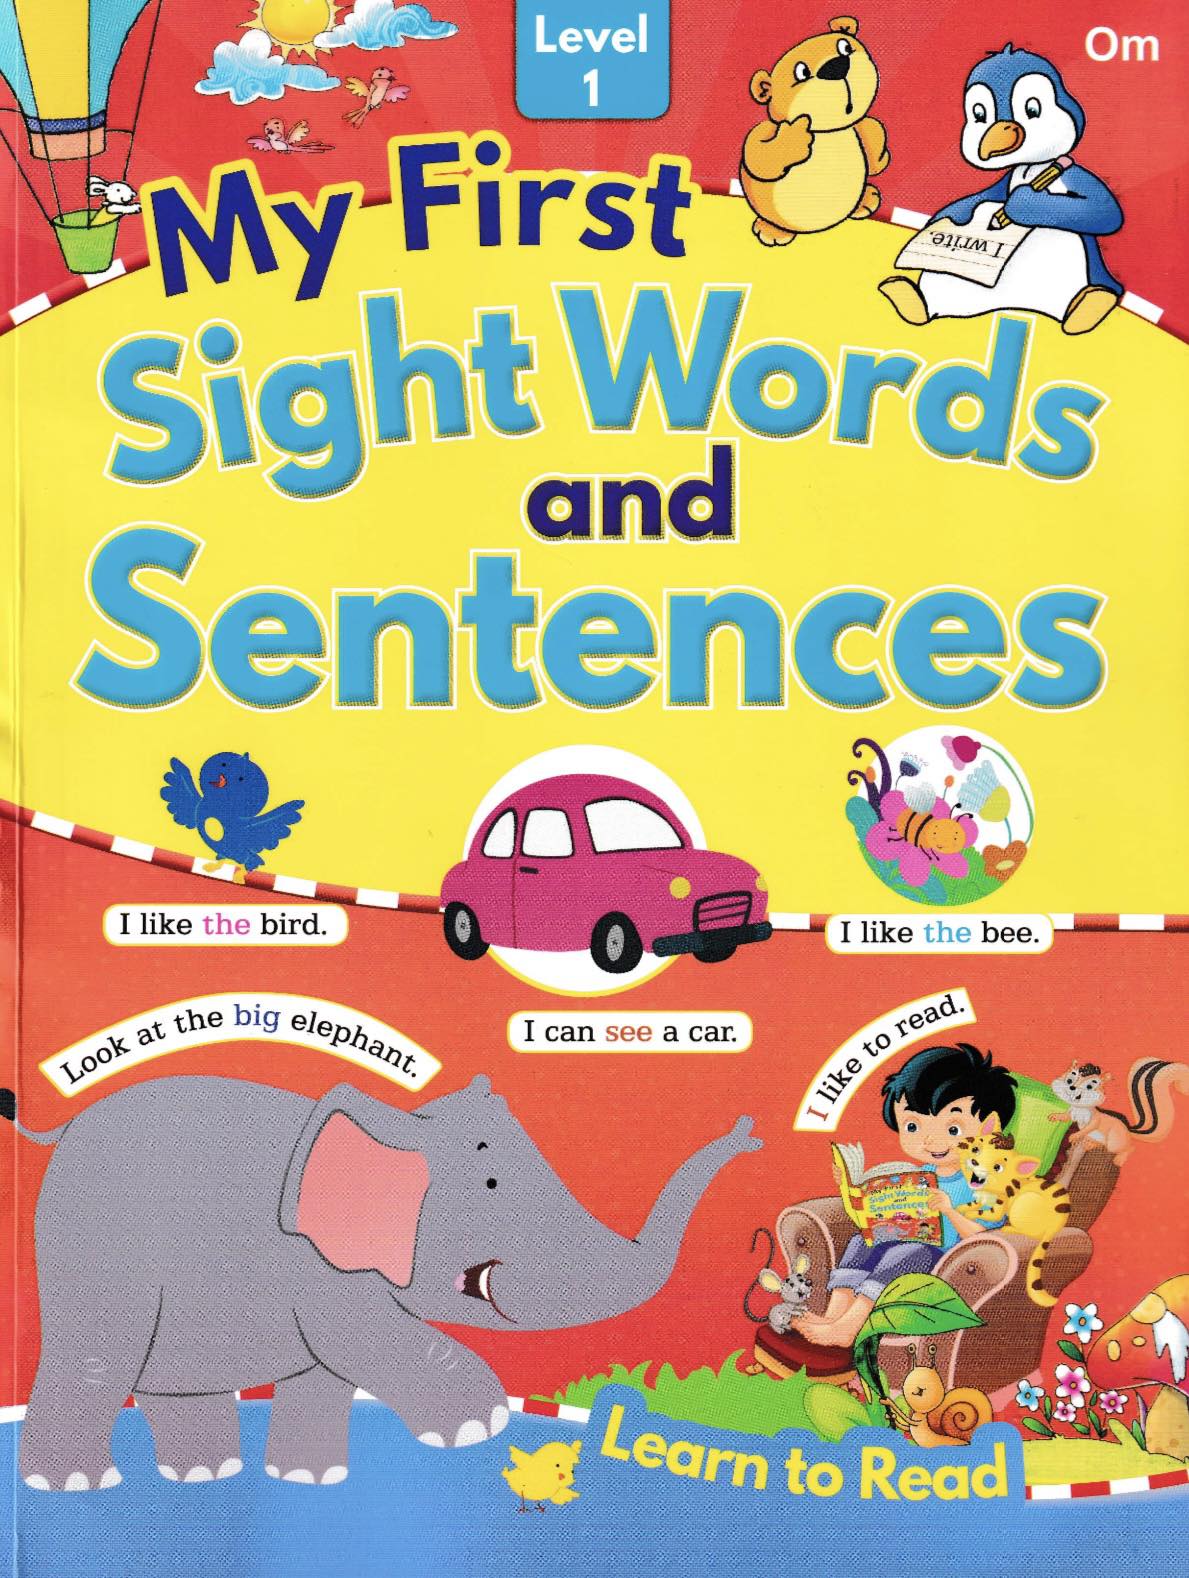 My First Sight Words and Sentences Level 1 to 3